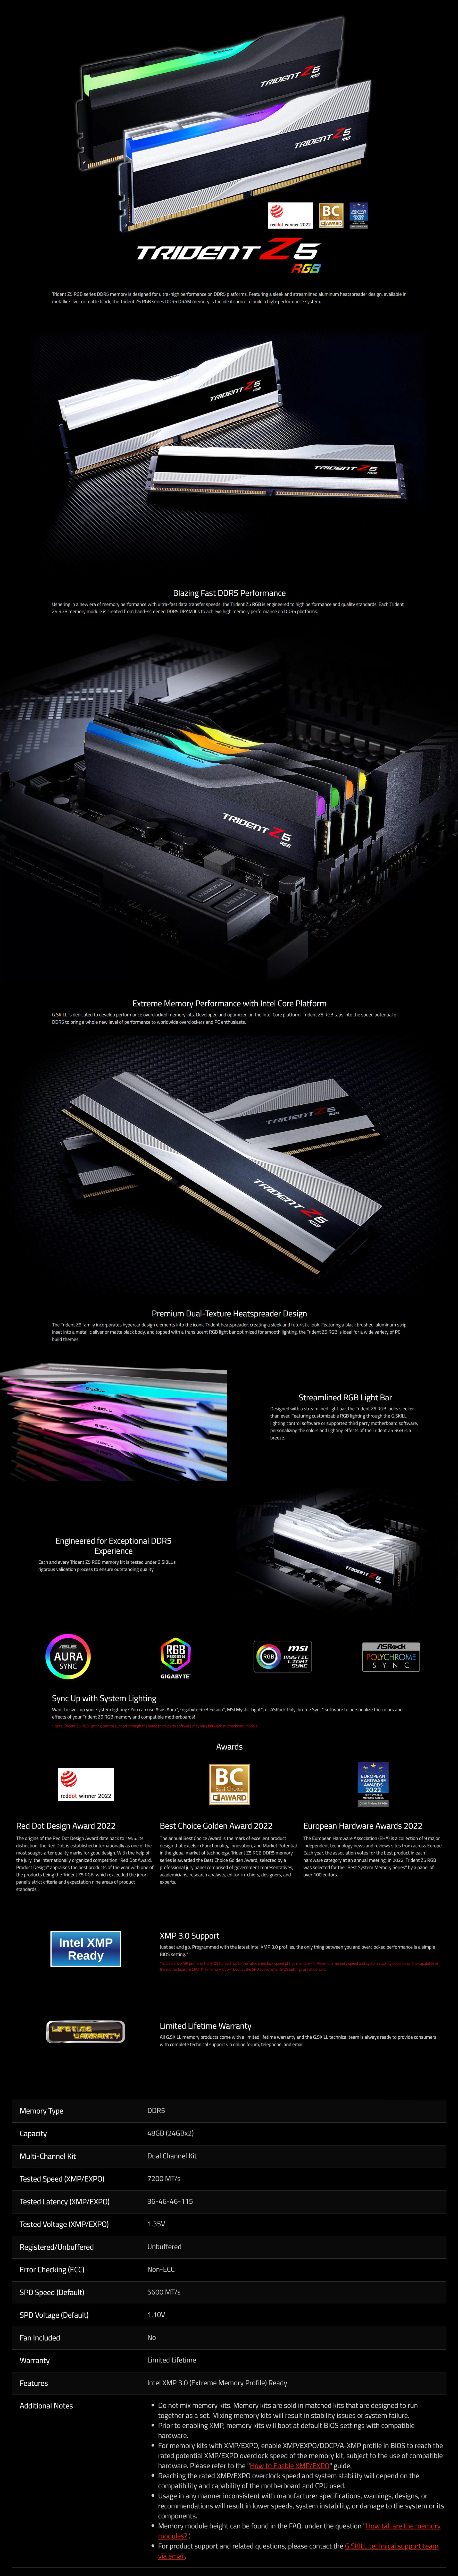 A large marketing image providing additional information about the product G.Skill 48GB Kit (2x24GB) DDR5 Trident Z5 RGB C36 7200MHz - Silver - Additional alt info not provided